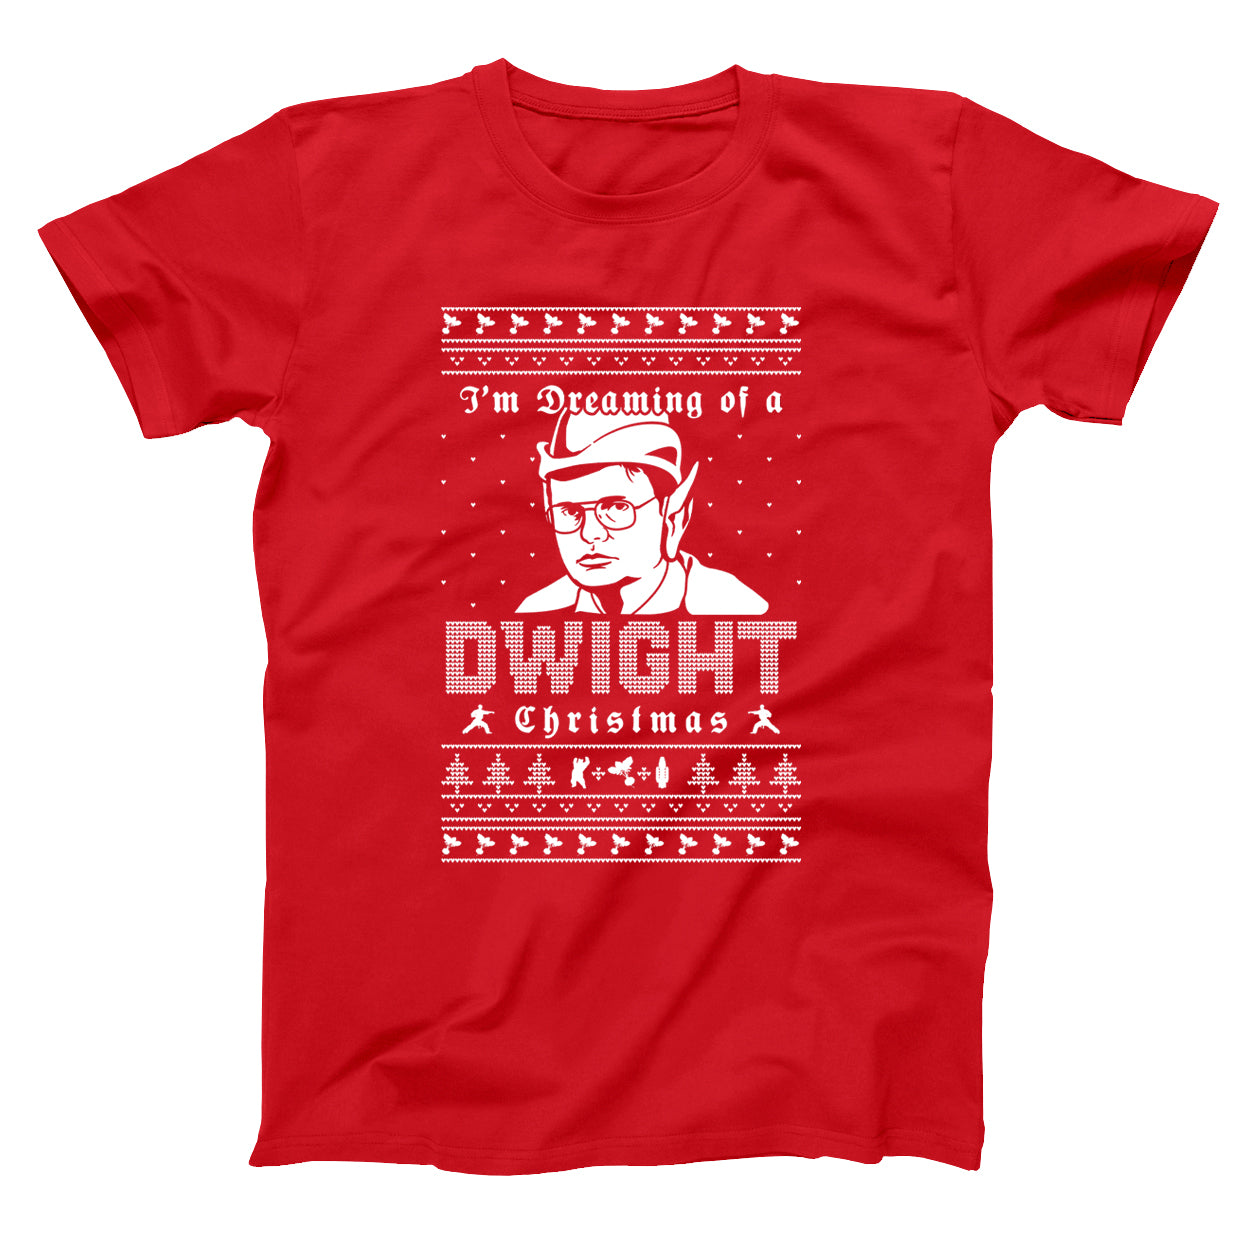 I'm Dreaming of a Dwight Christmas - DonkeyTees